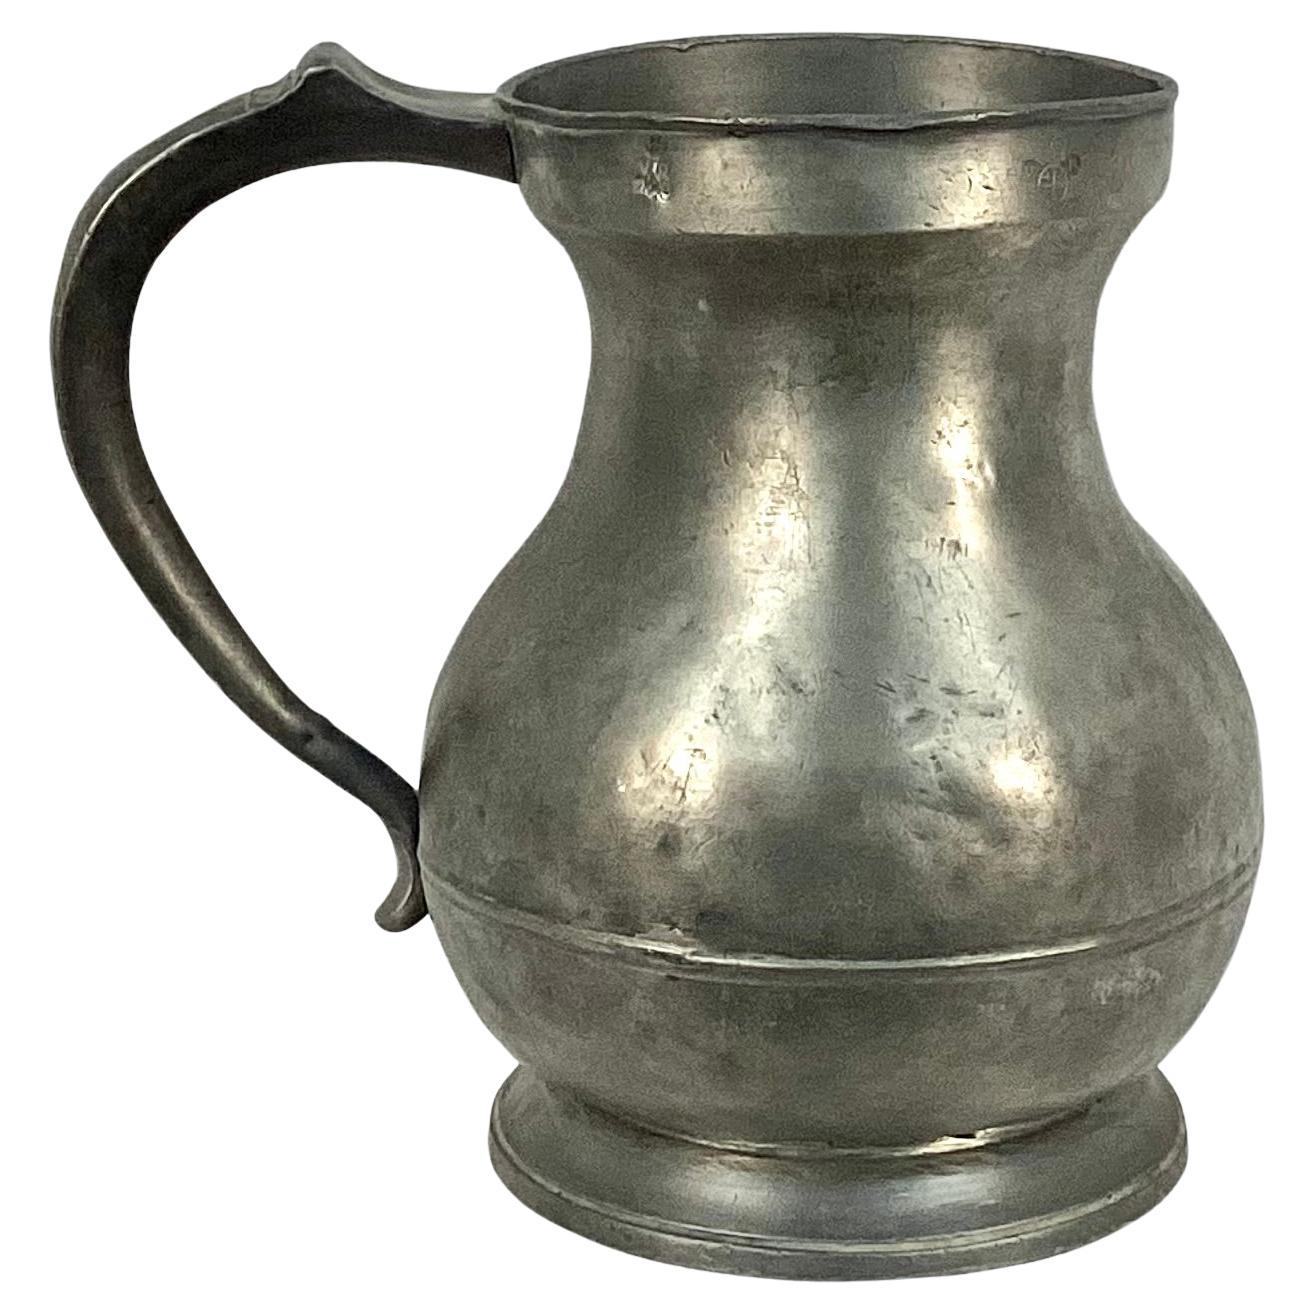 Heavy 19th century pewter one gallon pitcher with large pewter handle.  Stamped Gallon with Queen Victoria certification mark. Etched on underside is name 'Colodny